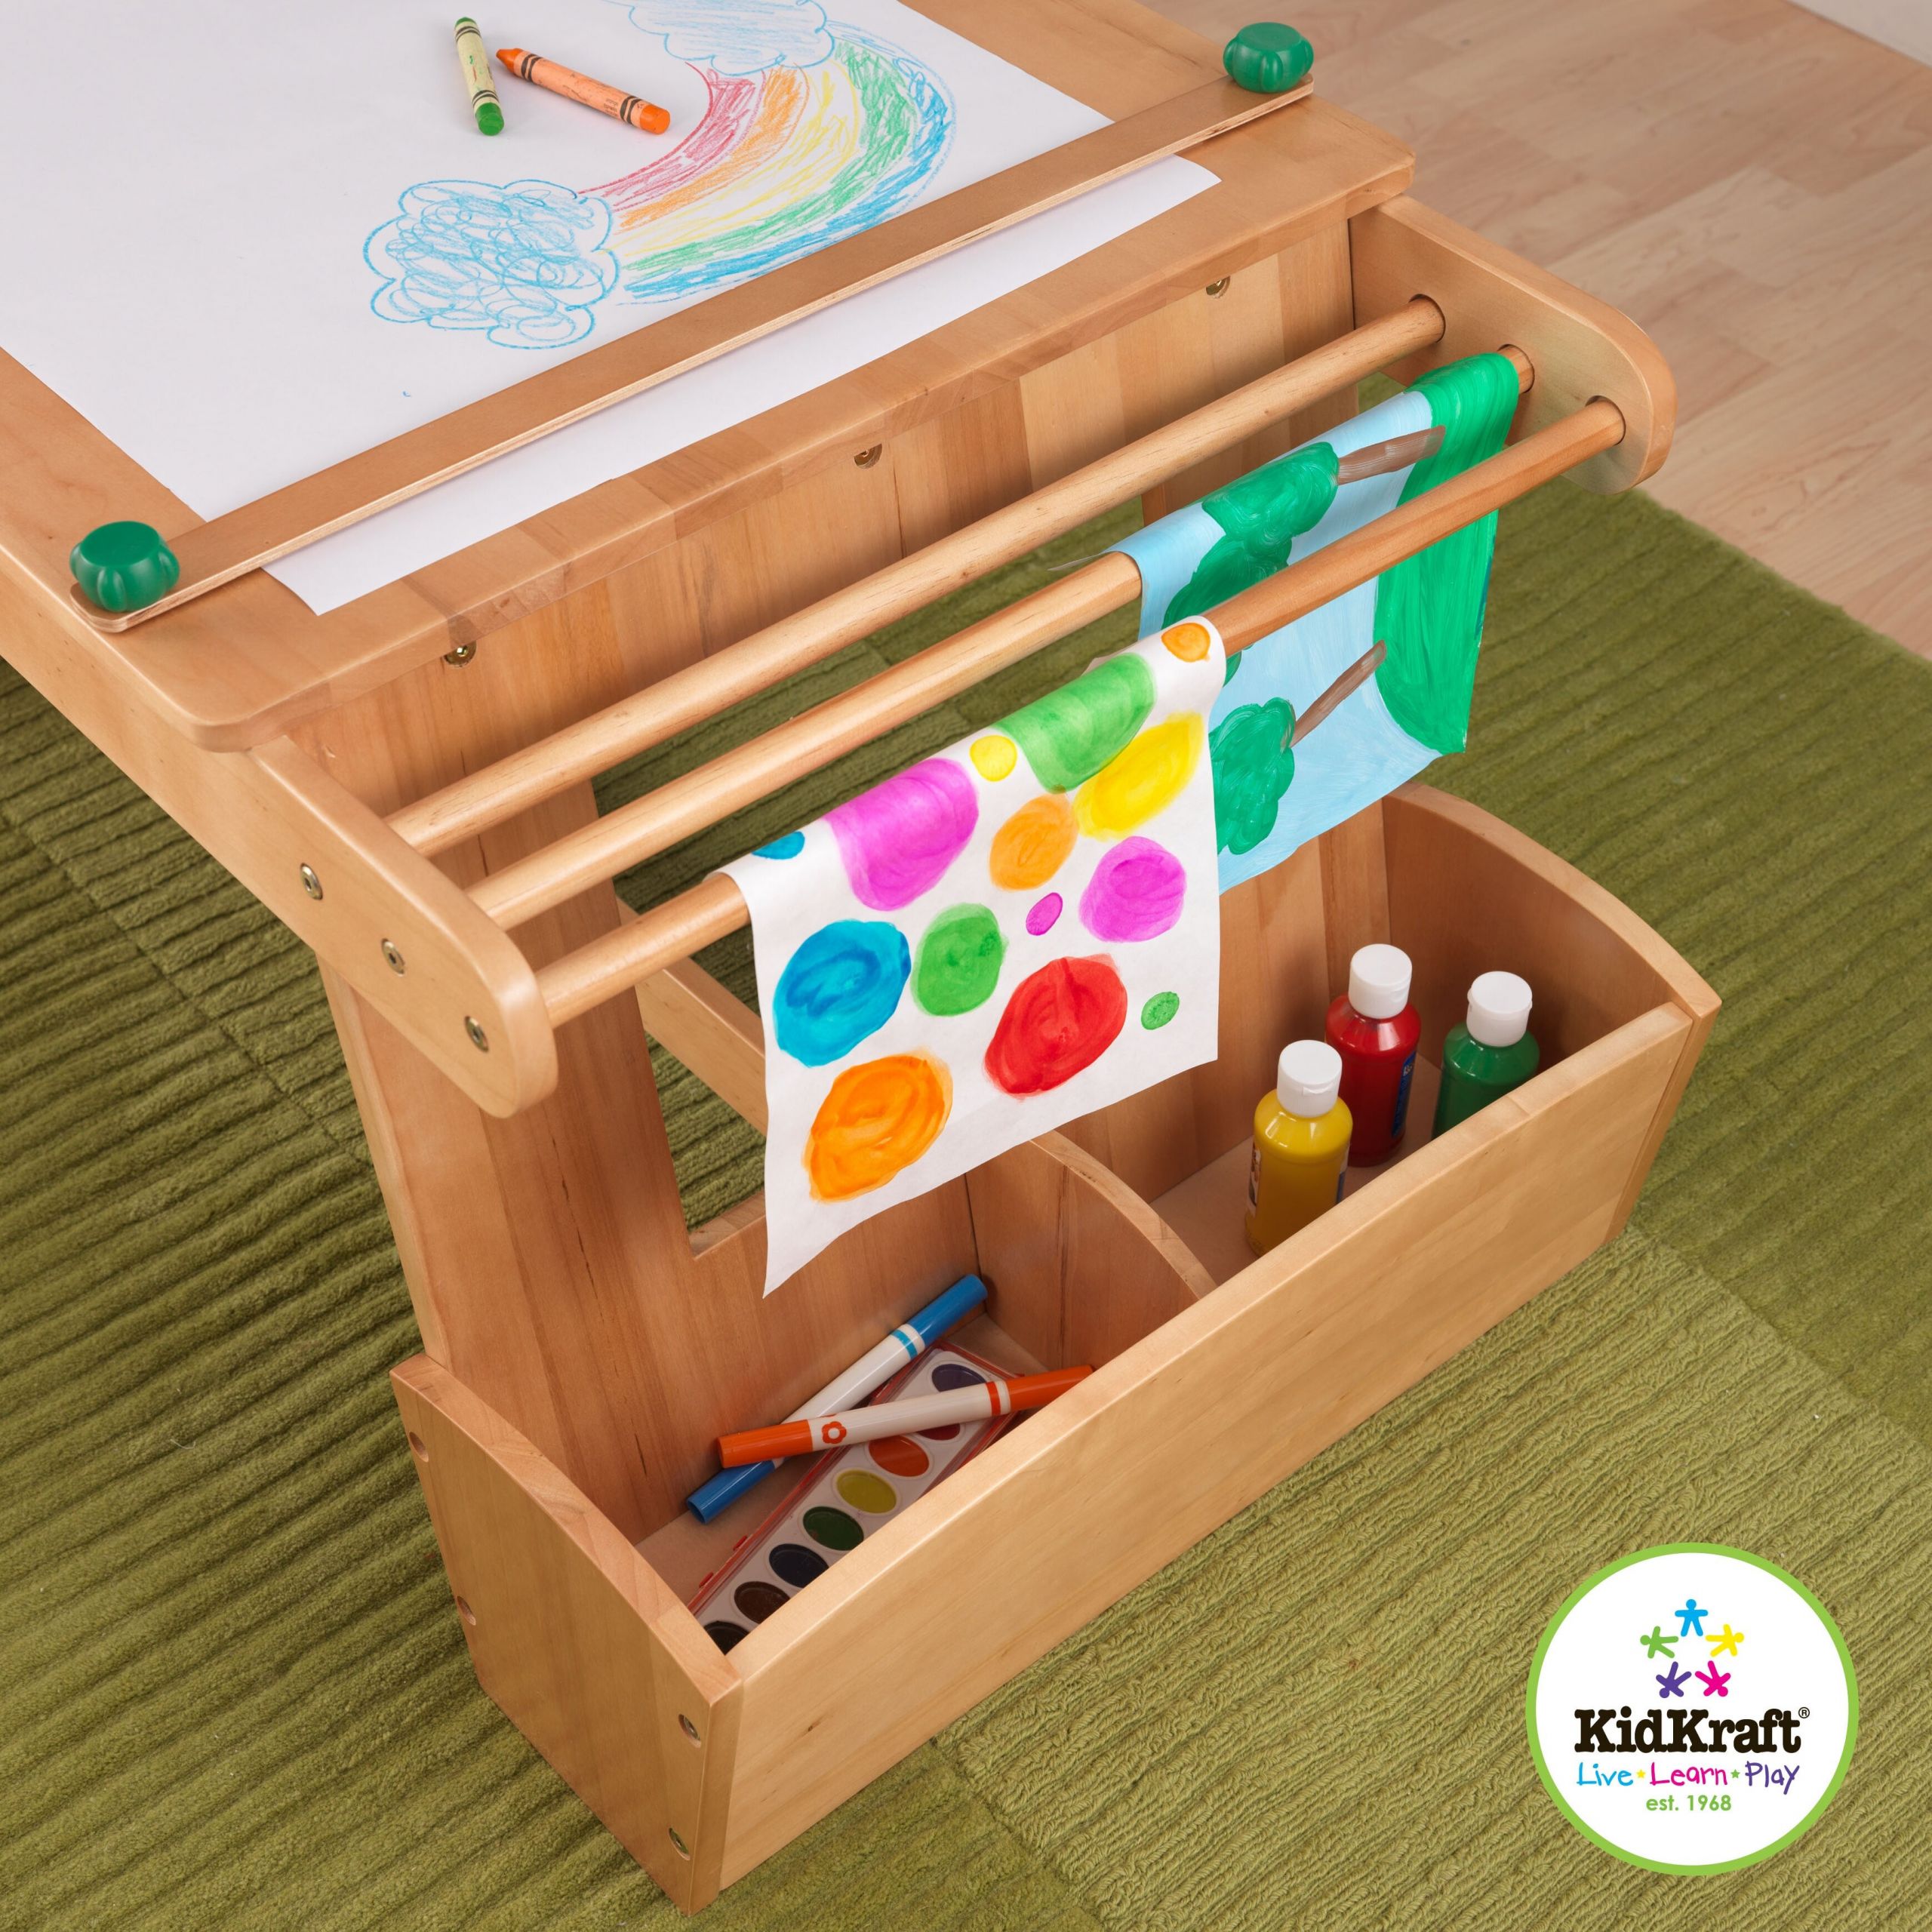 Kids Art And Craft Tables
 KidKraft Drying Rack and Storage Kids Arts and Crafts